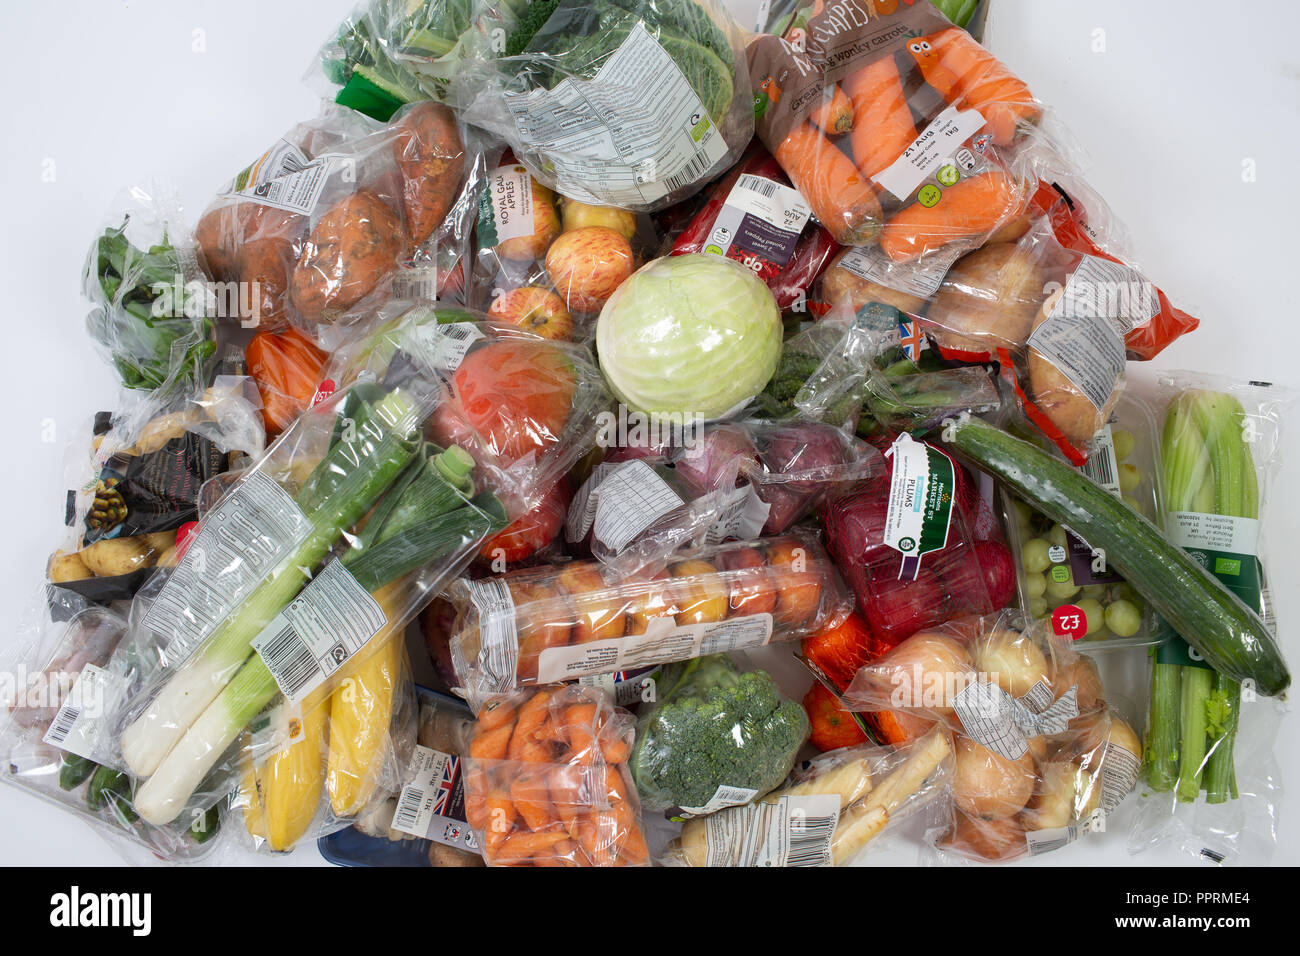 Plastic packaging on fruit and vegetables in the UK Stock Photo